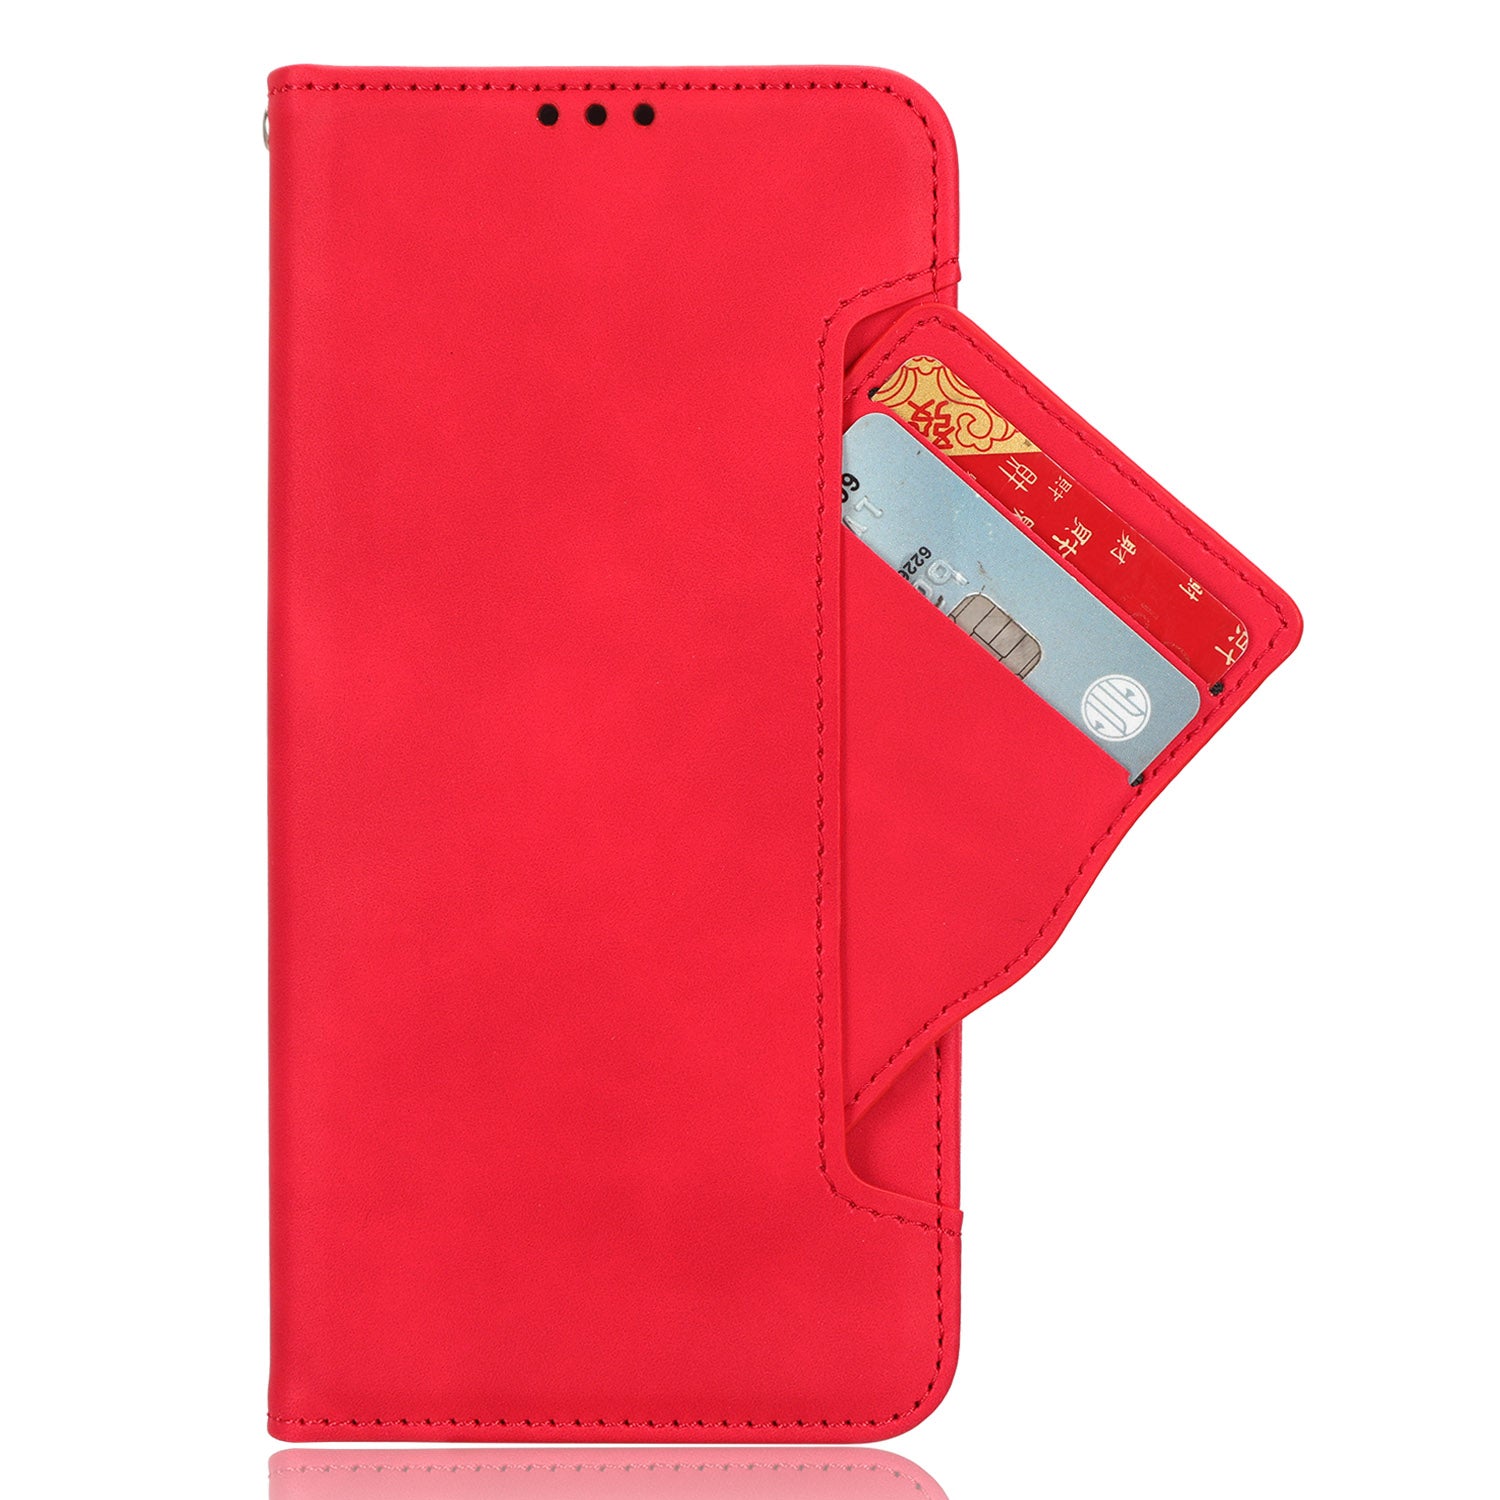 Uniqkart for Blackview Oscal C30 / Oscal C30 Pro Multiple Card Slots PU Leather Case Wallet Phone Stand Cover - Red